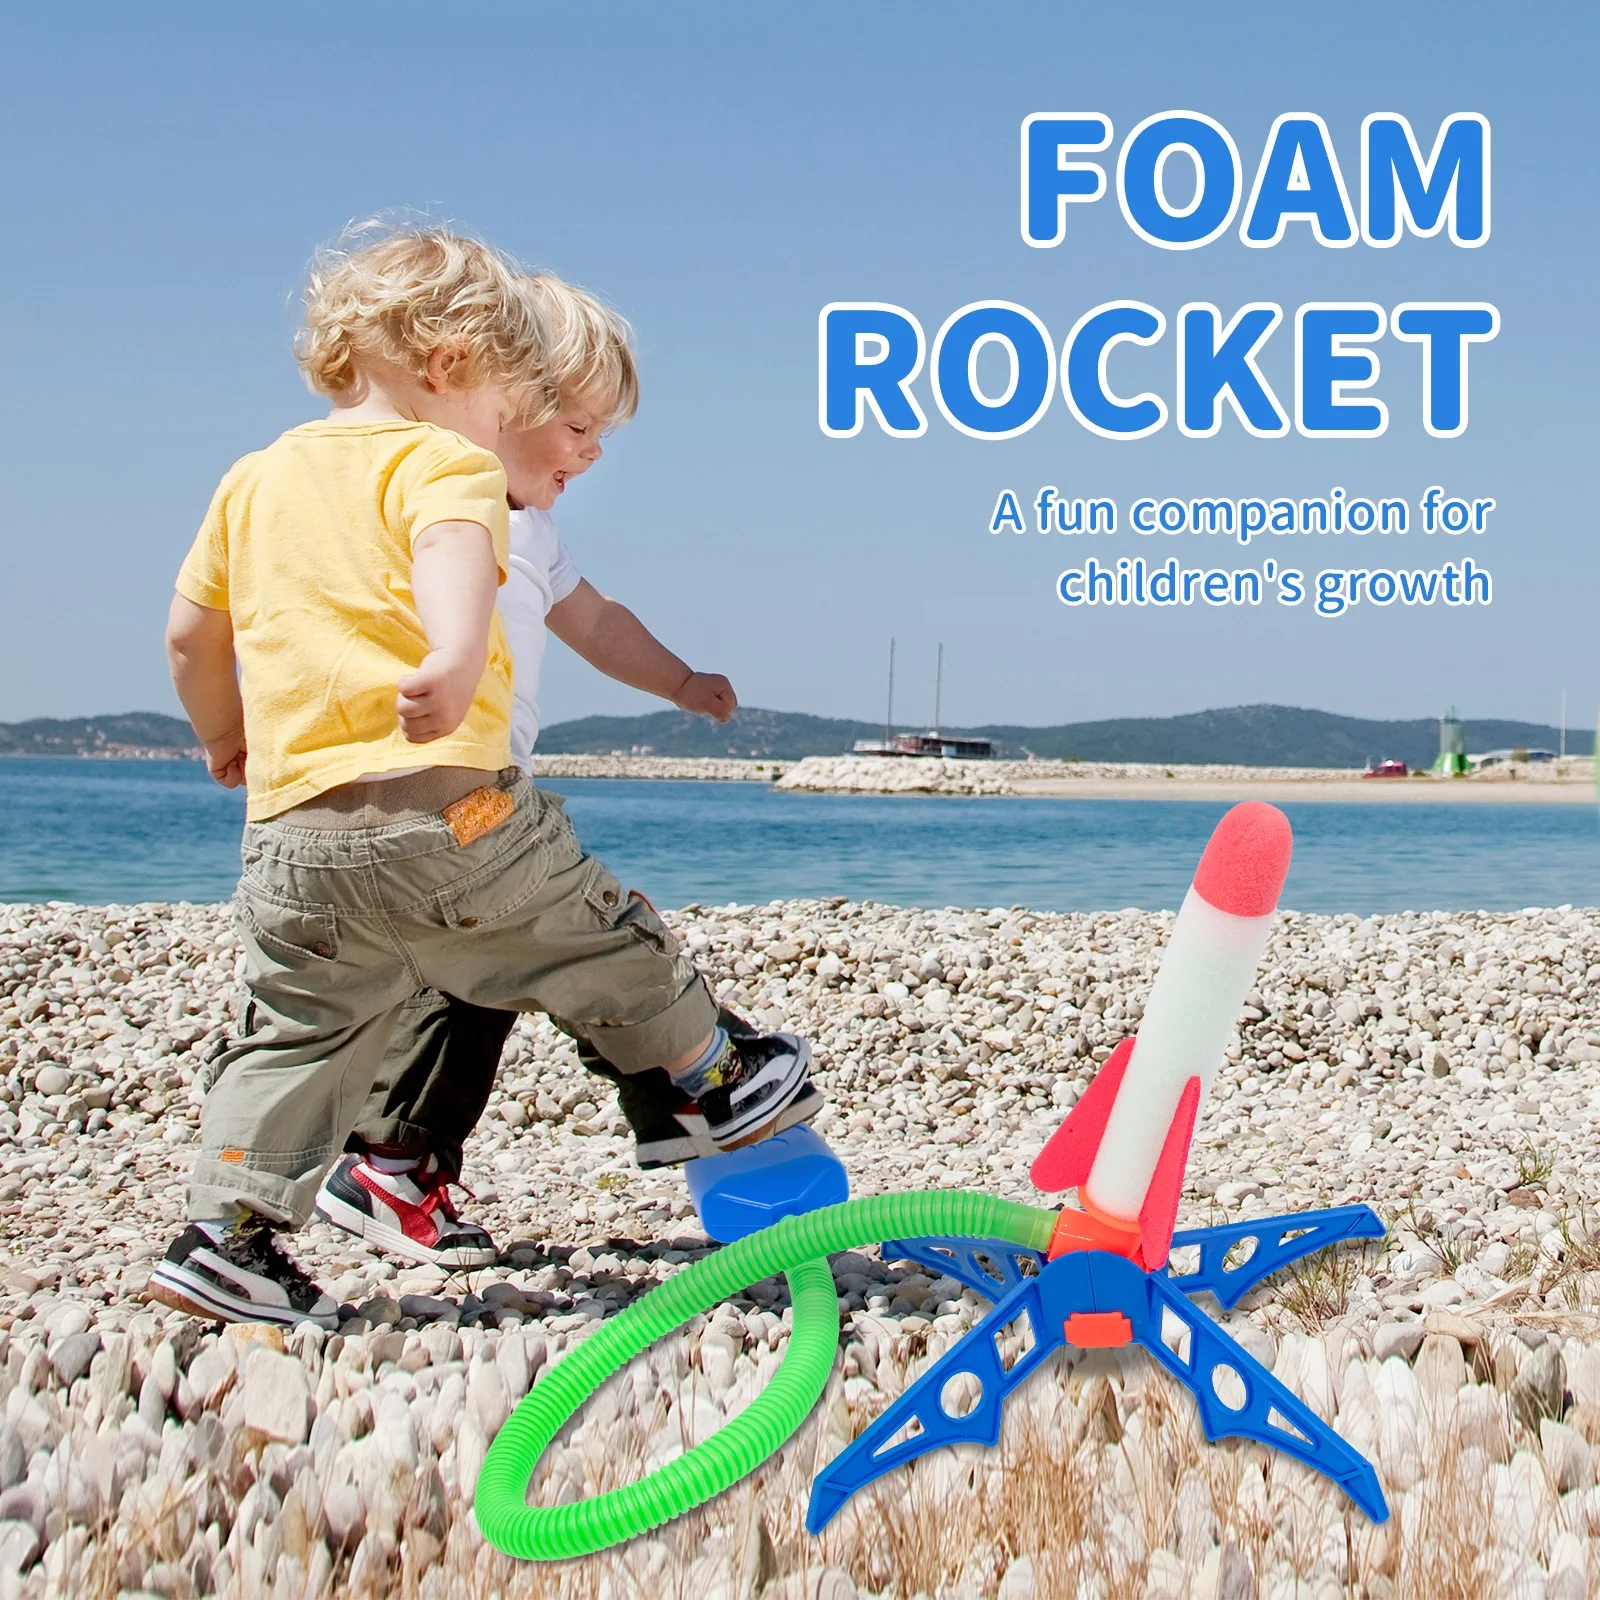 

Kid Air Rocket Foot Pump Launcher Toys Sport Game Jump Stomp Outdoor Child Play Set Toy Pressed Rocket Launchers Pedal Games